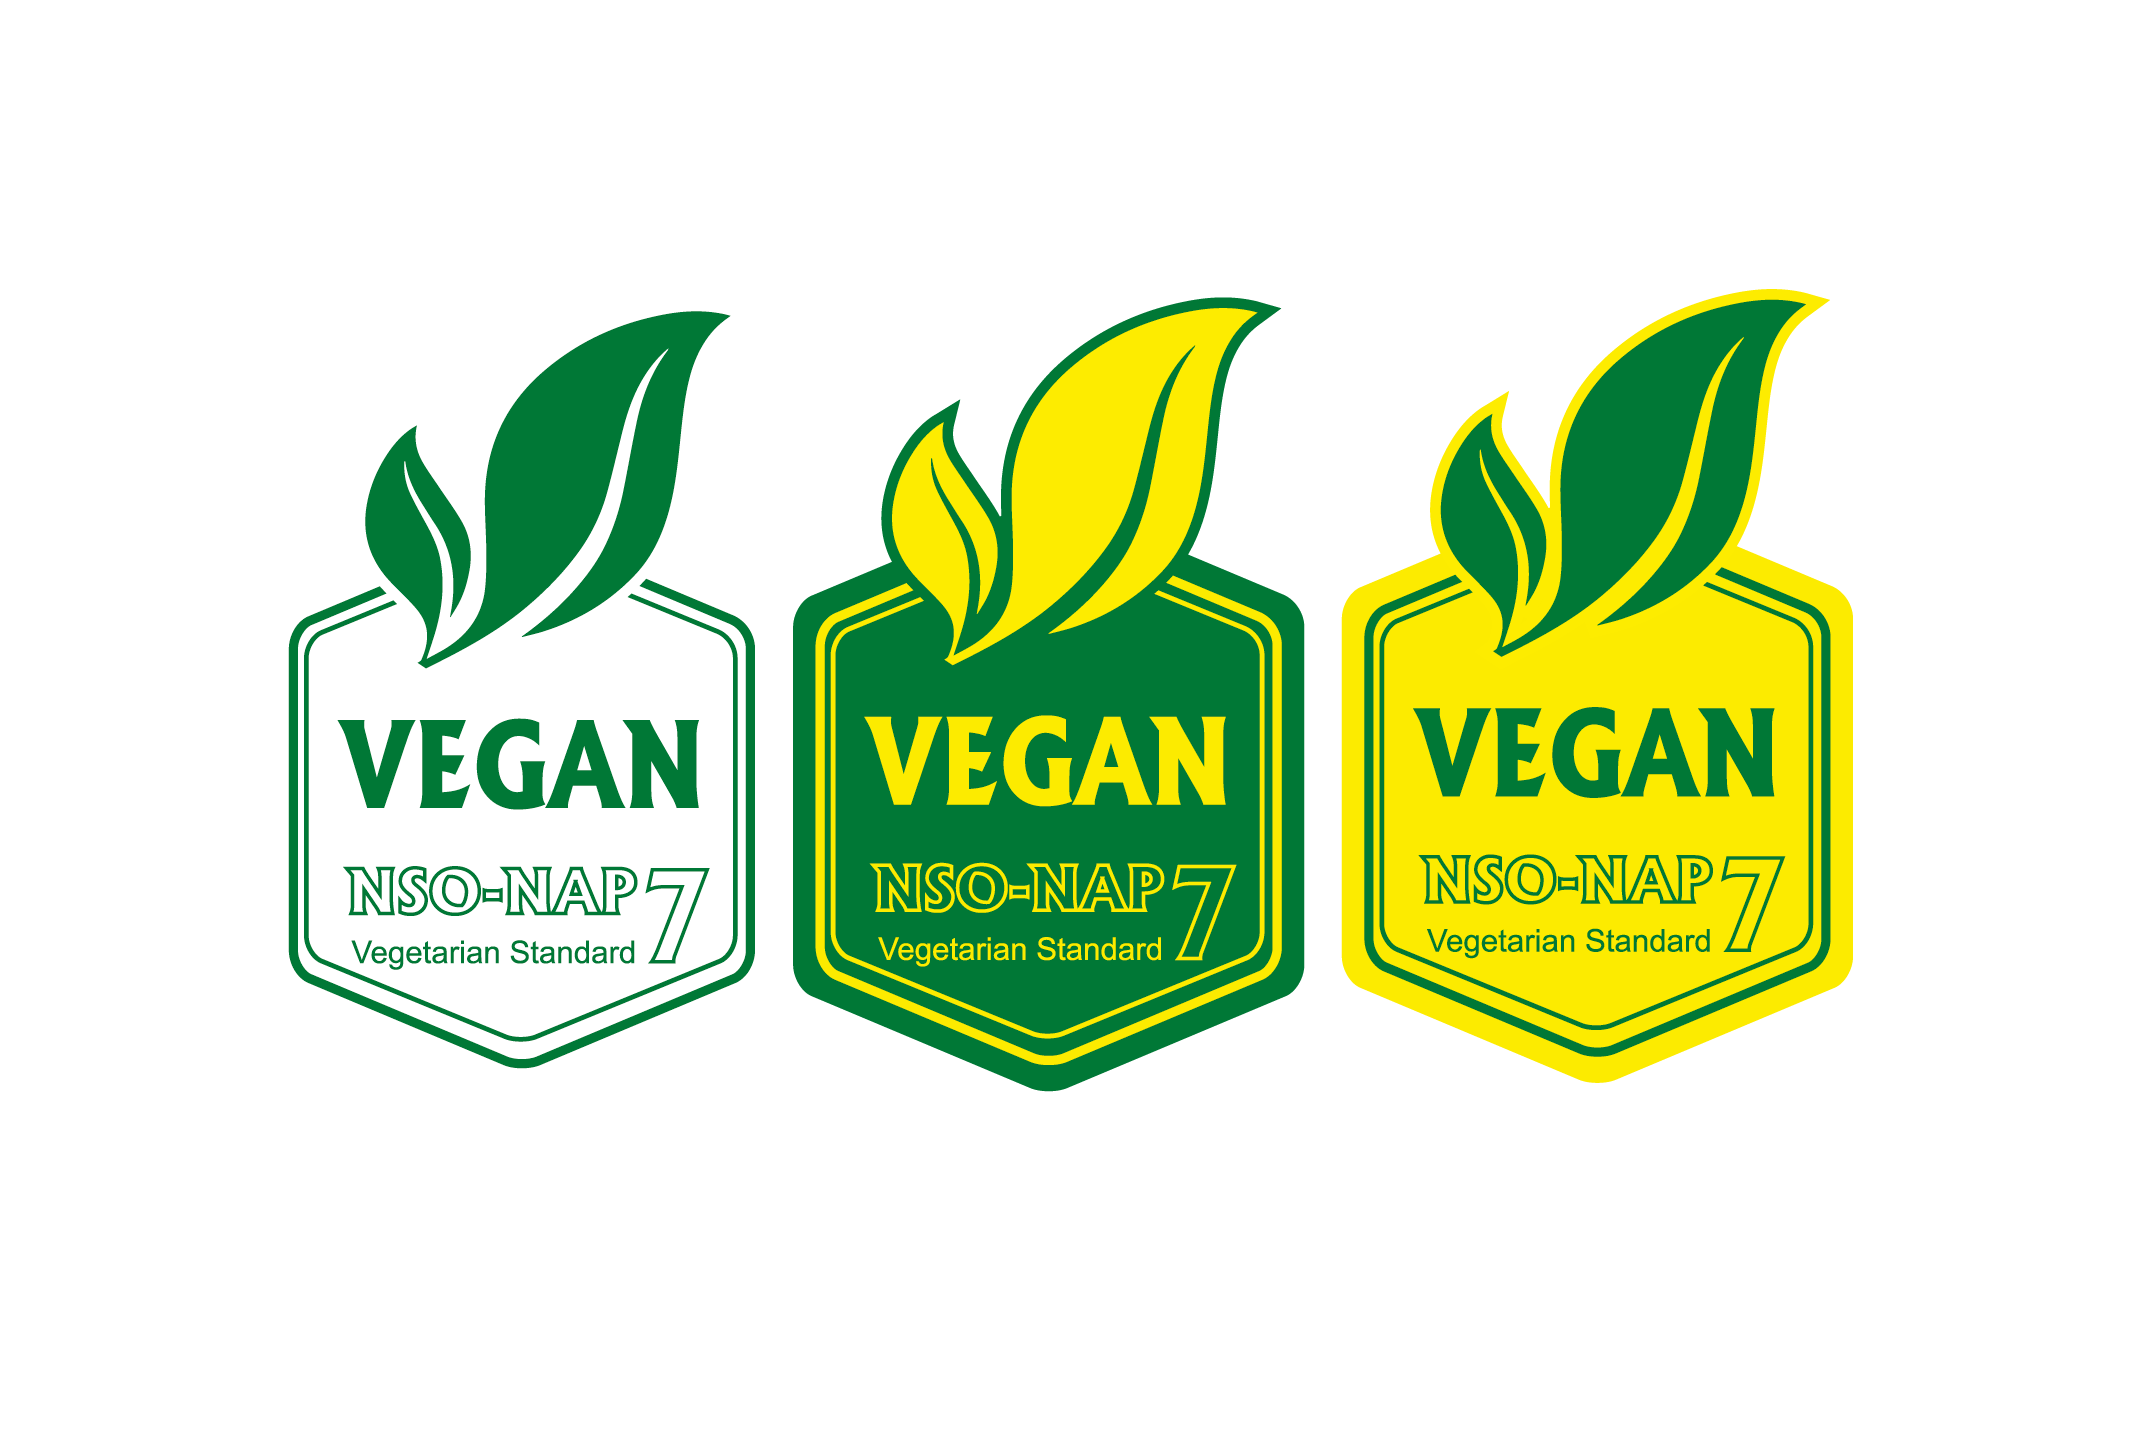 Vegan Symbol Clipart PNG Images, Icon For Vegan Food Vector Illustration  Symbols Isolated On White Background, Food Icons, White Icons, Vegan Icons  PNG Image For Free Download